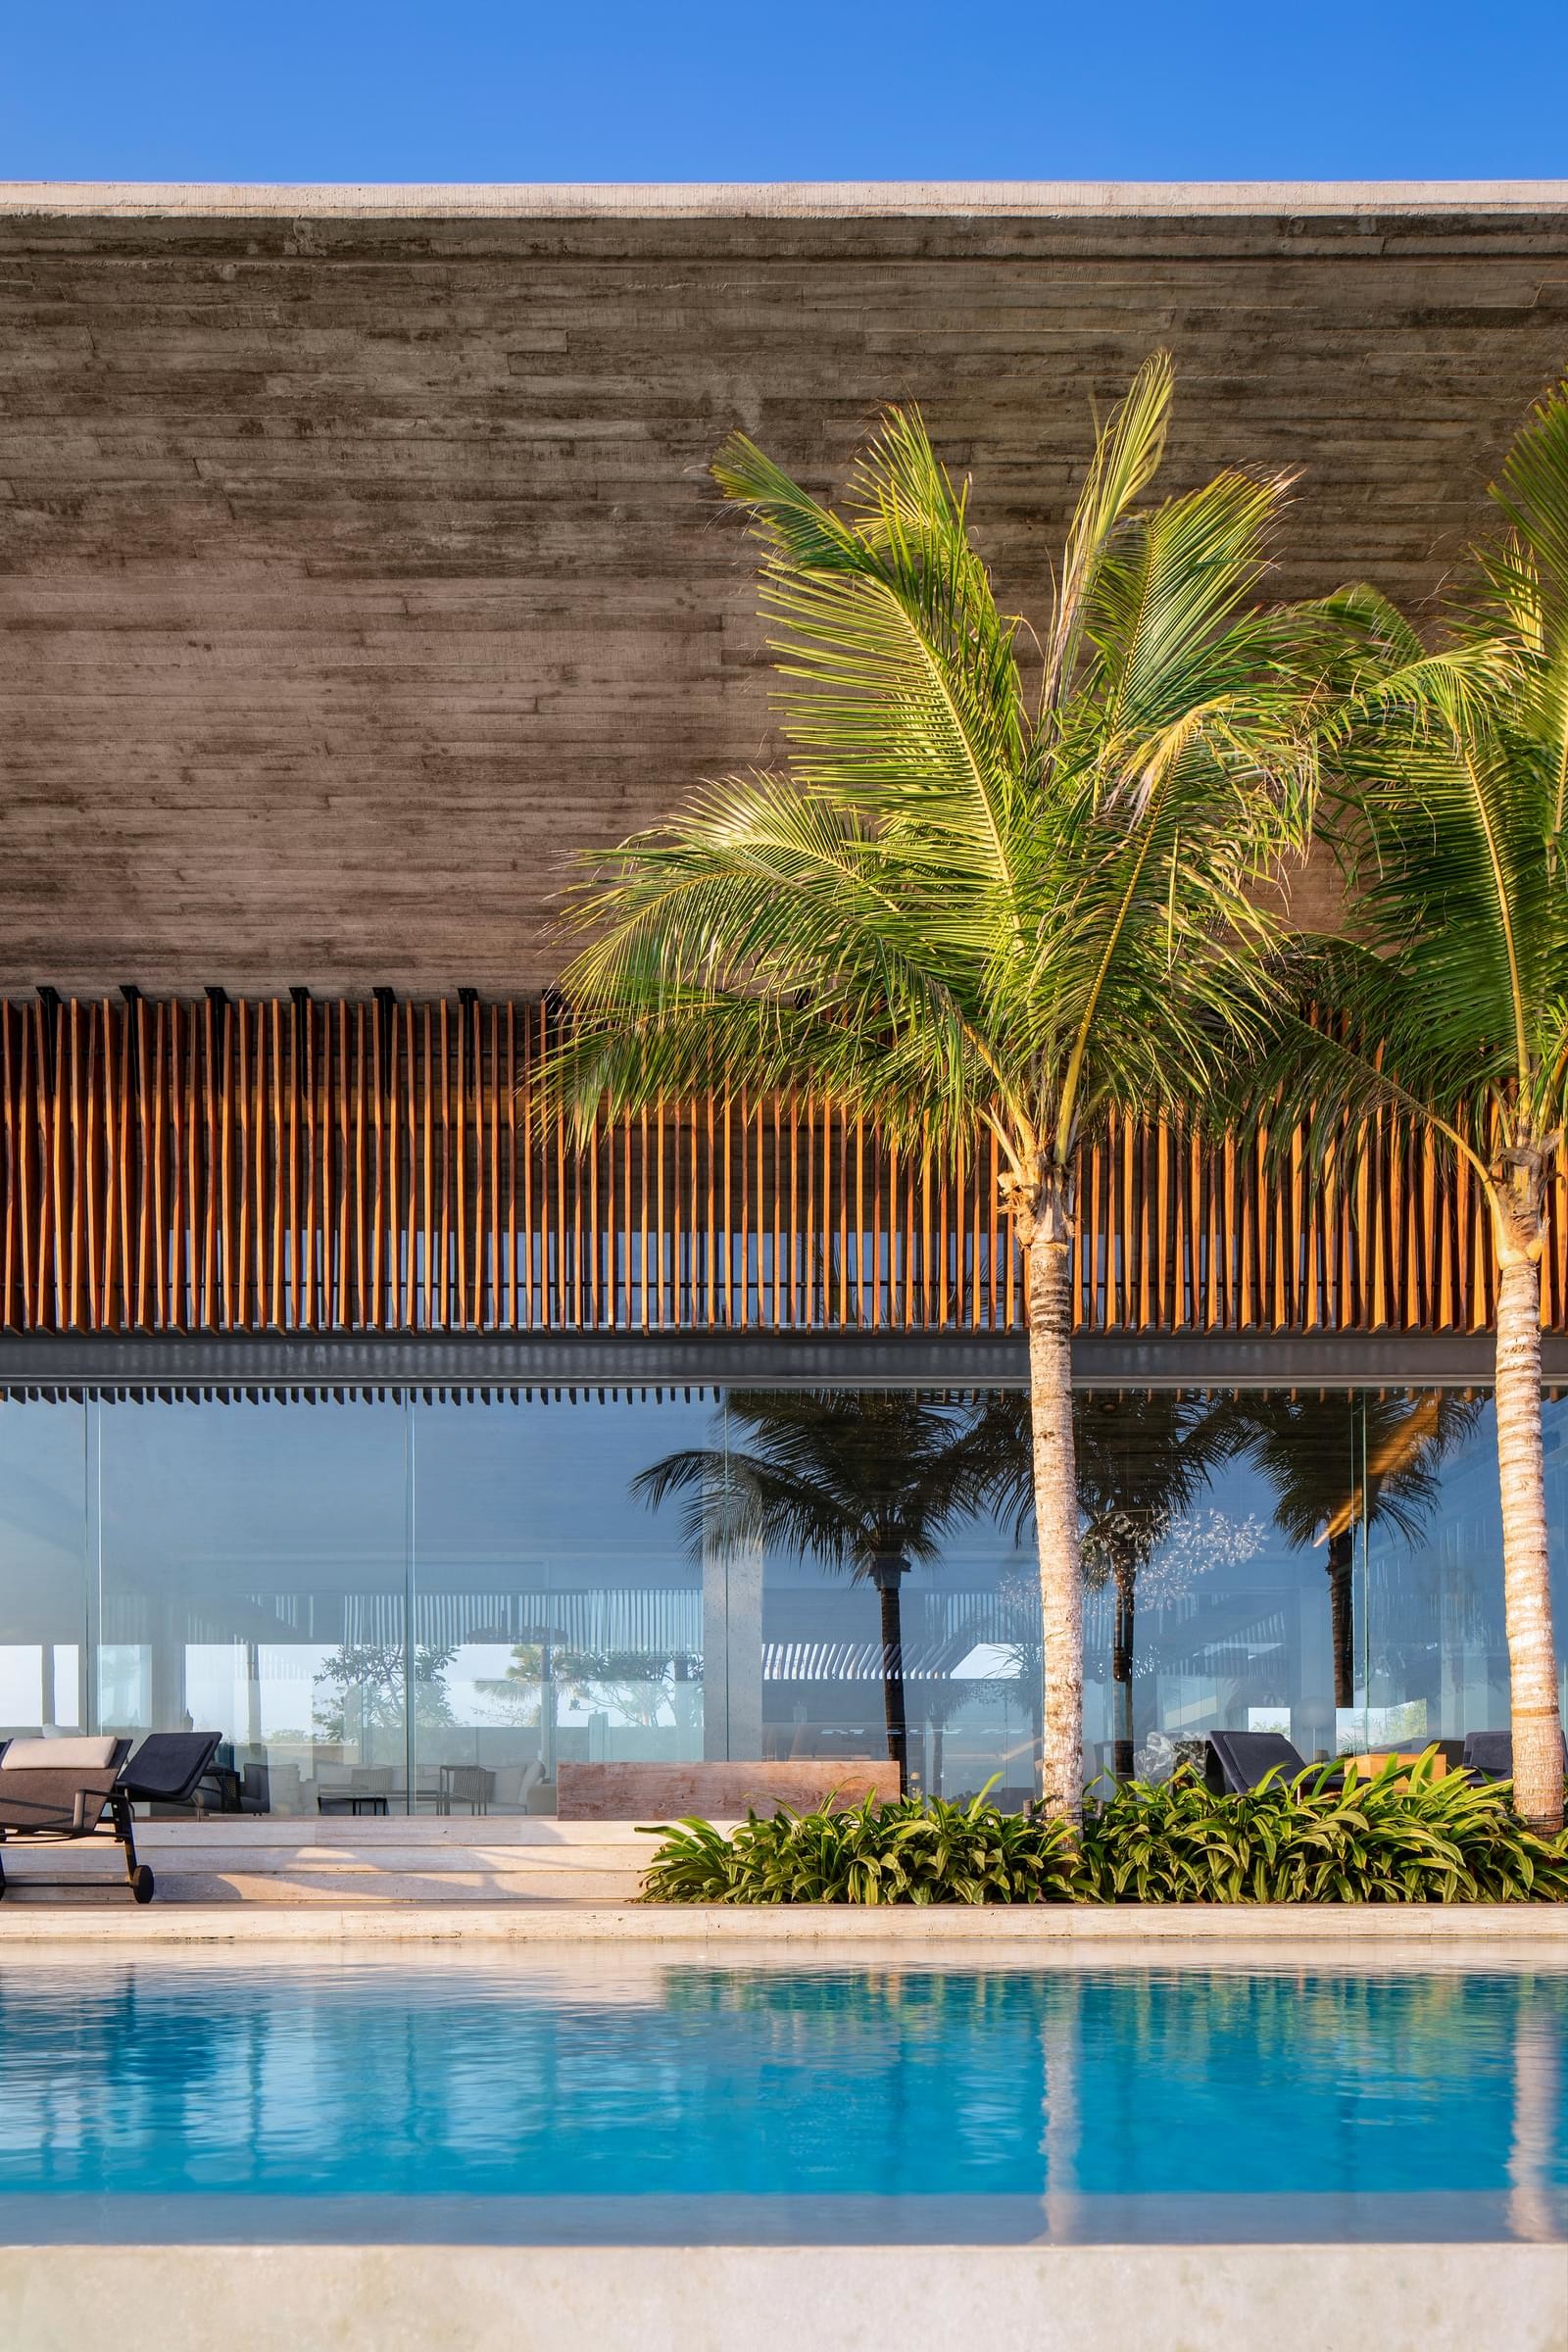 Luxurious villa in Indonesia by SAOTA